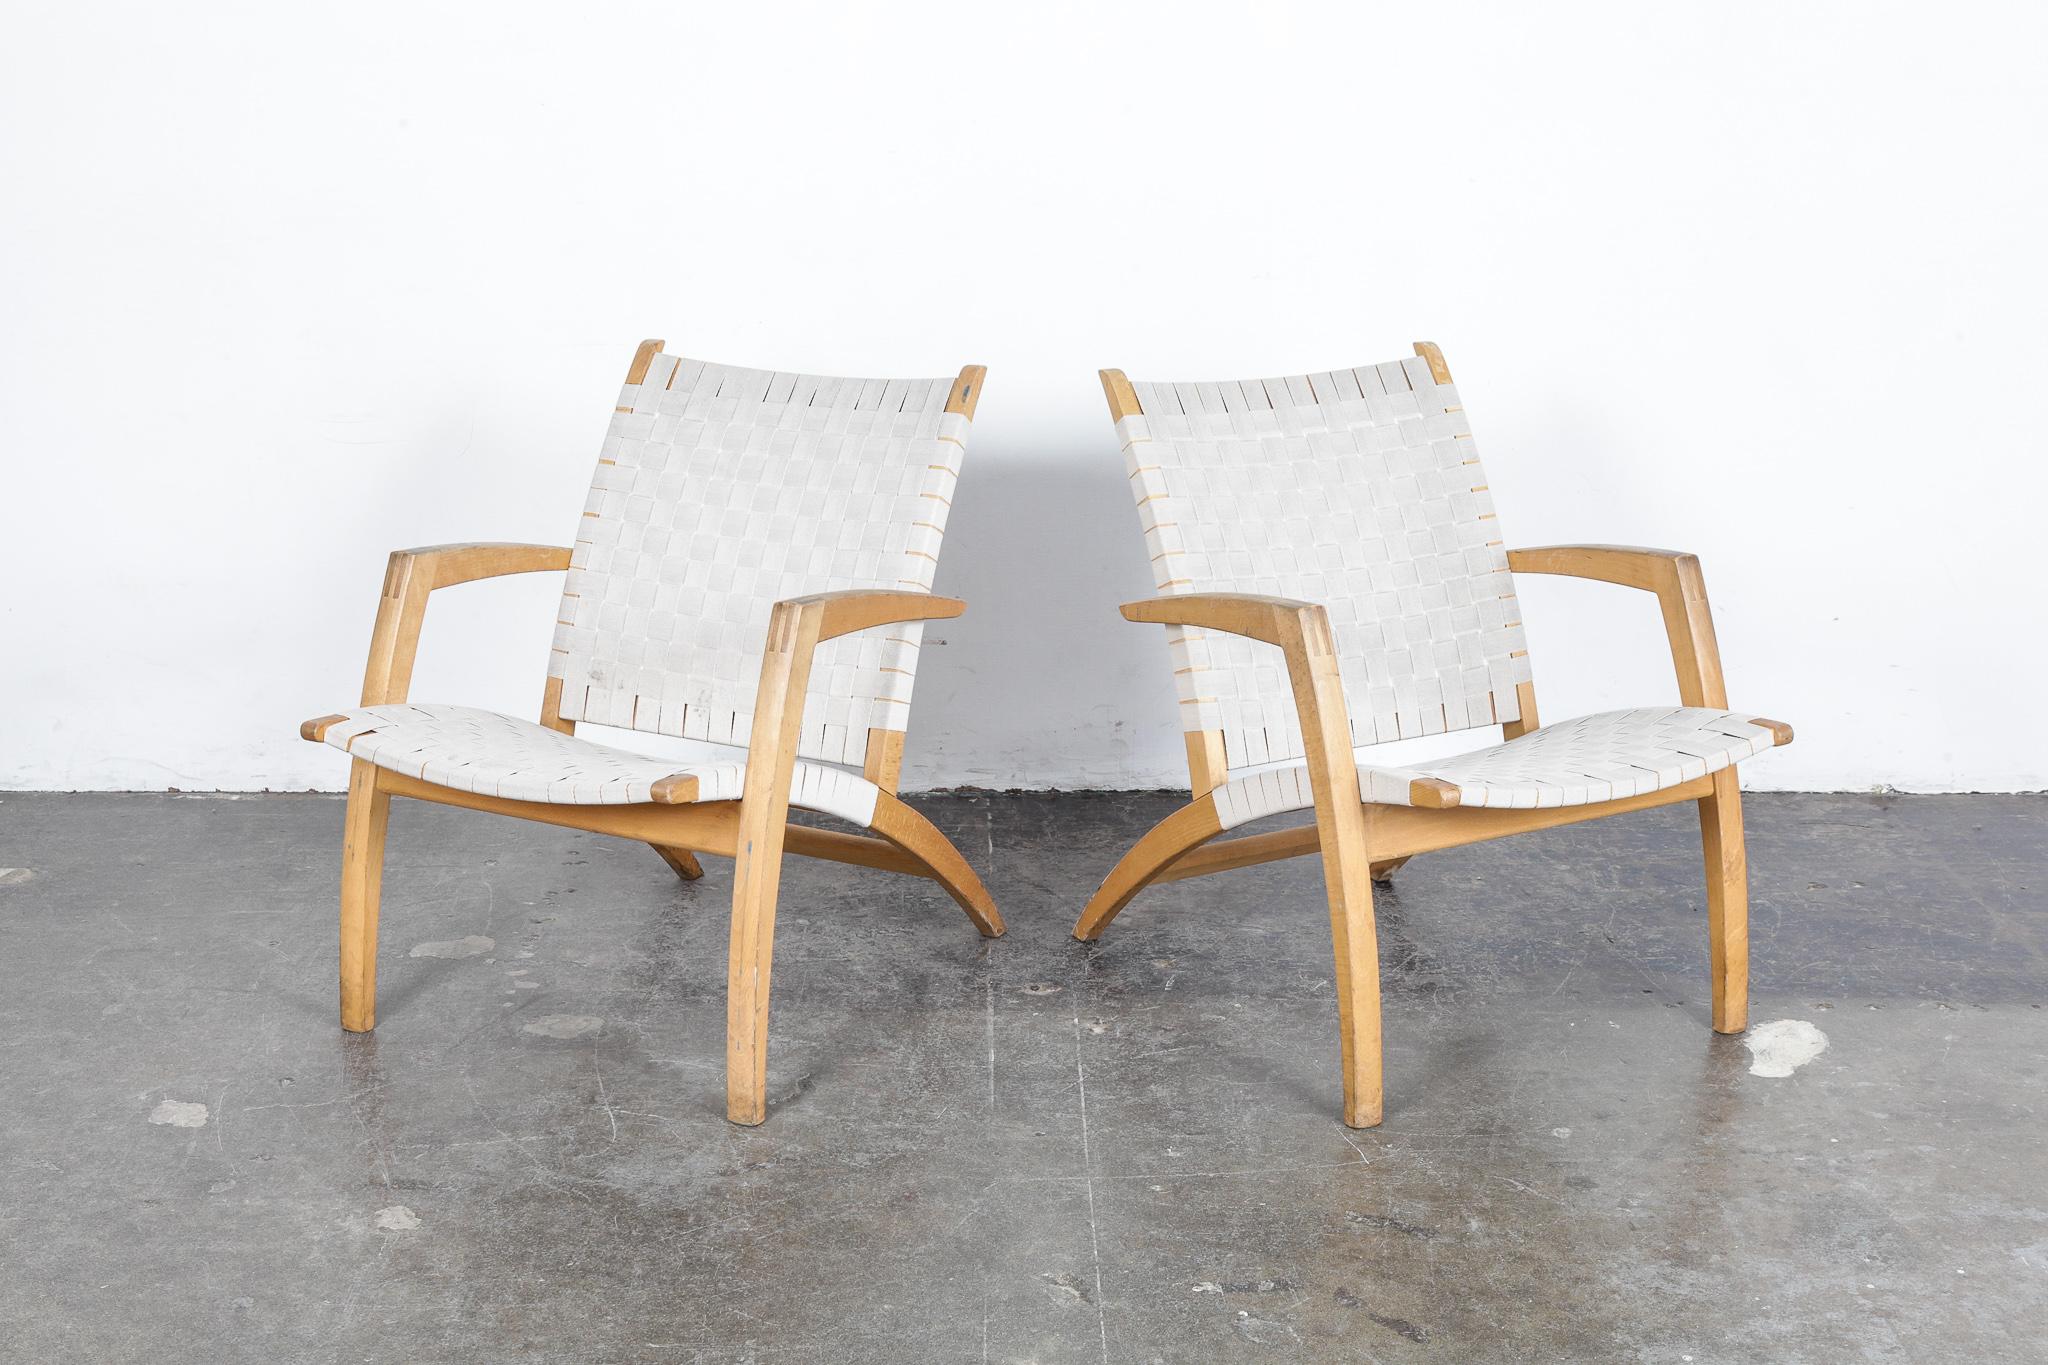 Pair of beechwood frame lounge chairs with exposed finger joinery on each arm, with original strapping, designed by Bill Potter for Vejle Mobelfabrik, Denmark, 1960s.